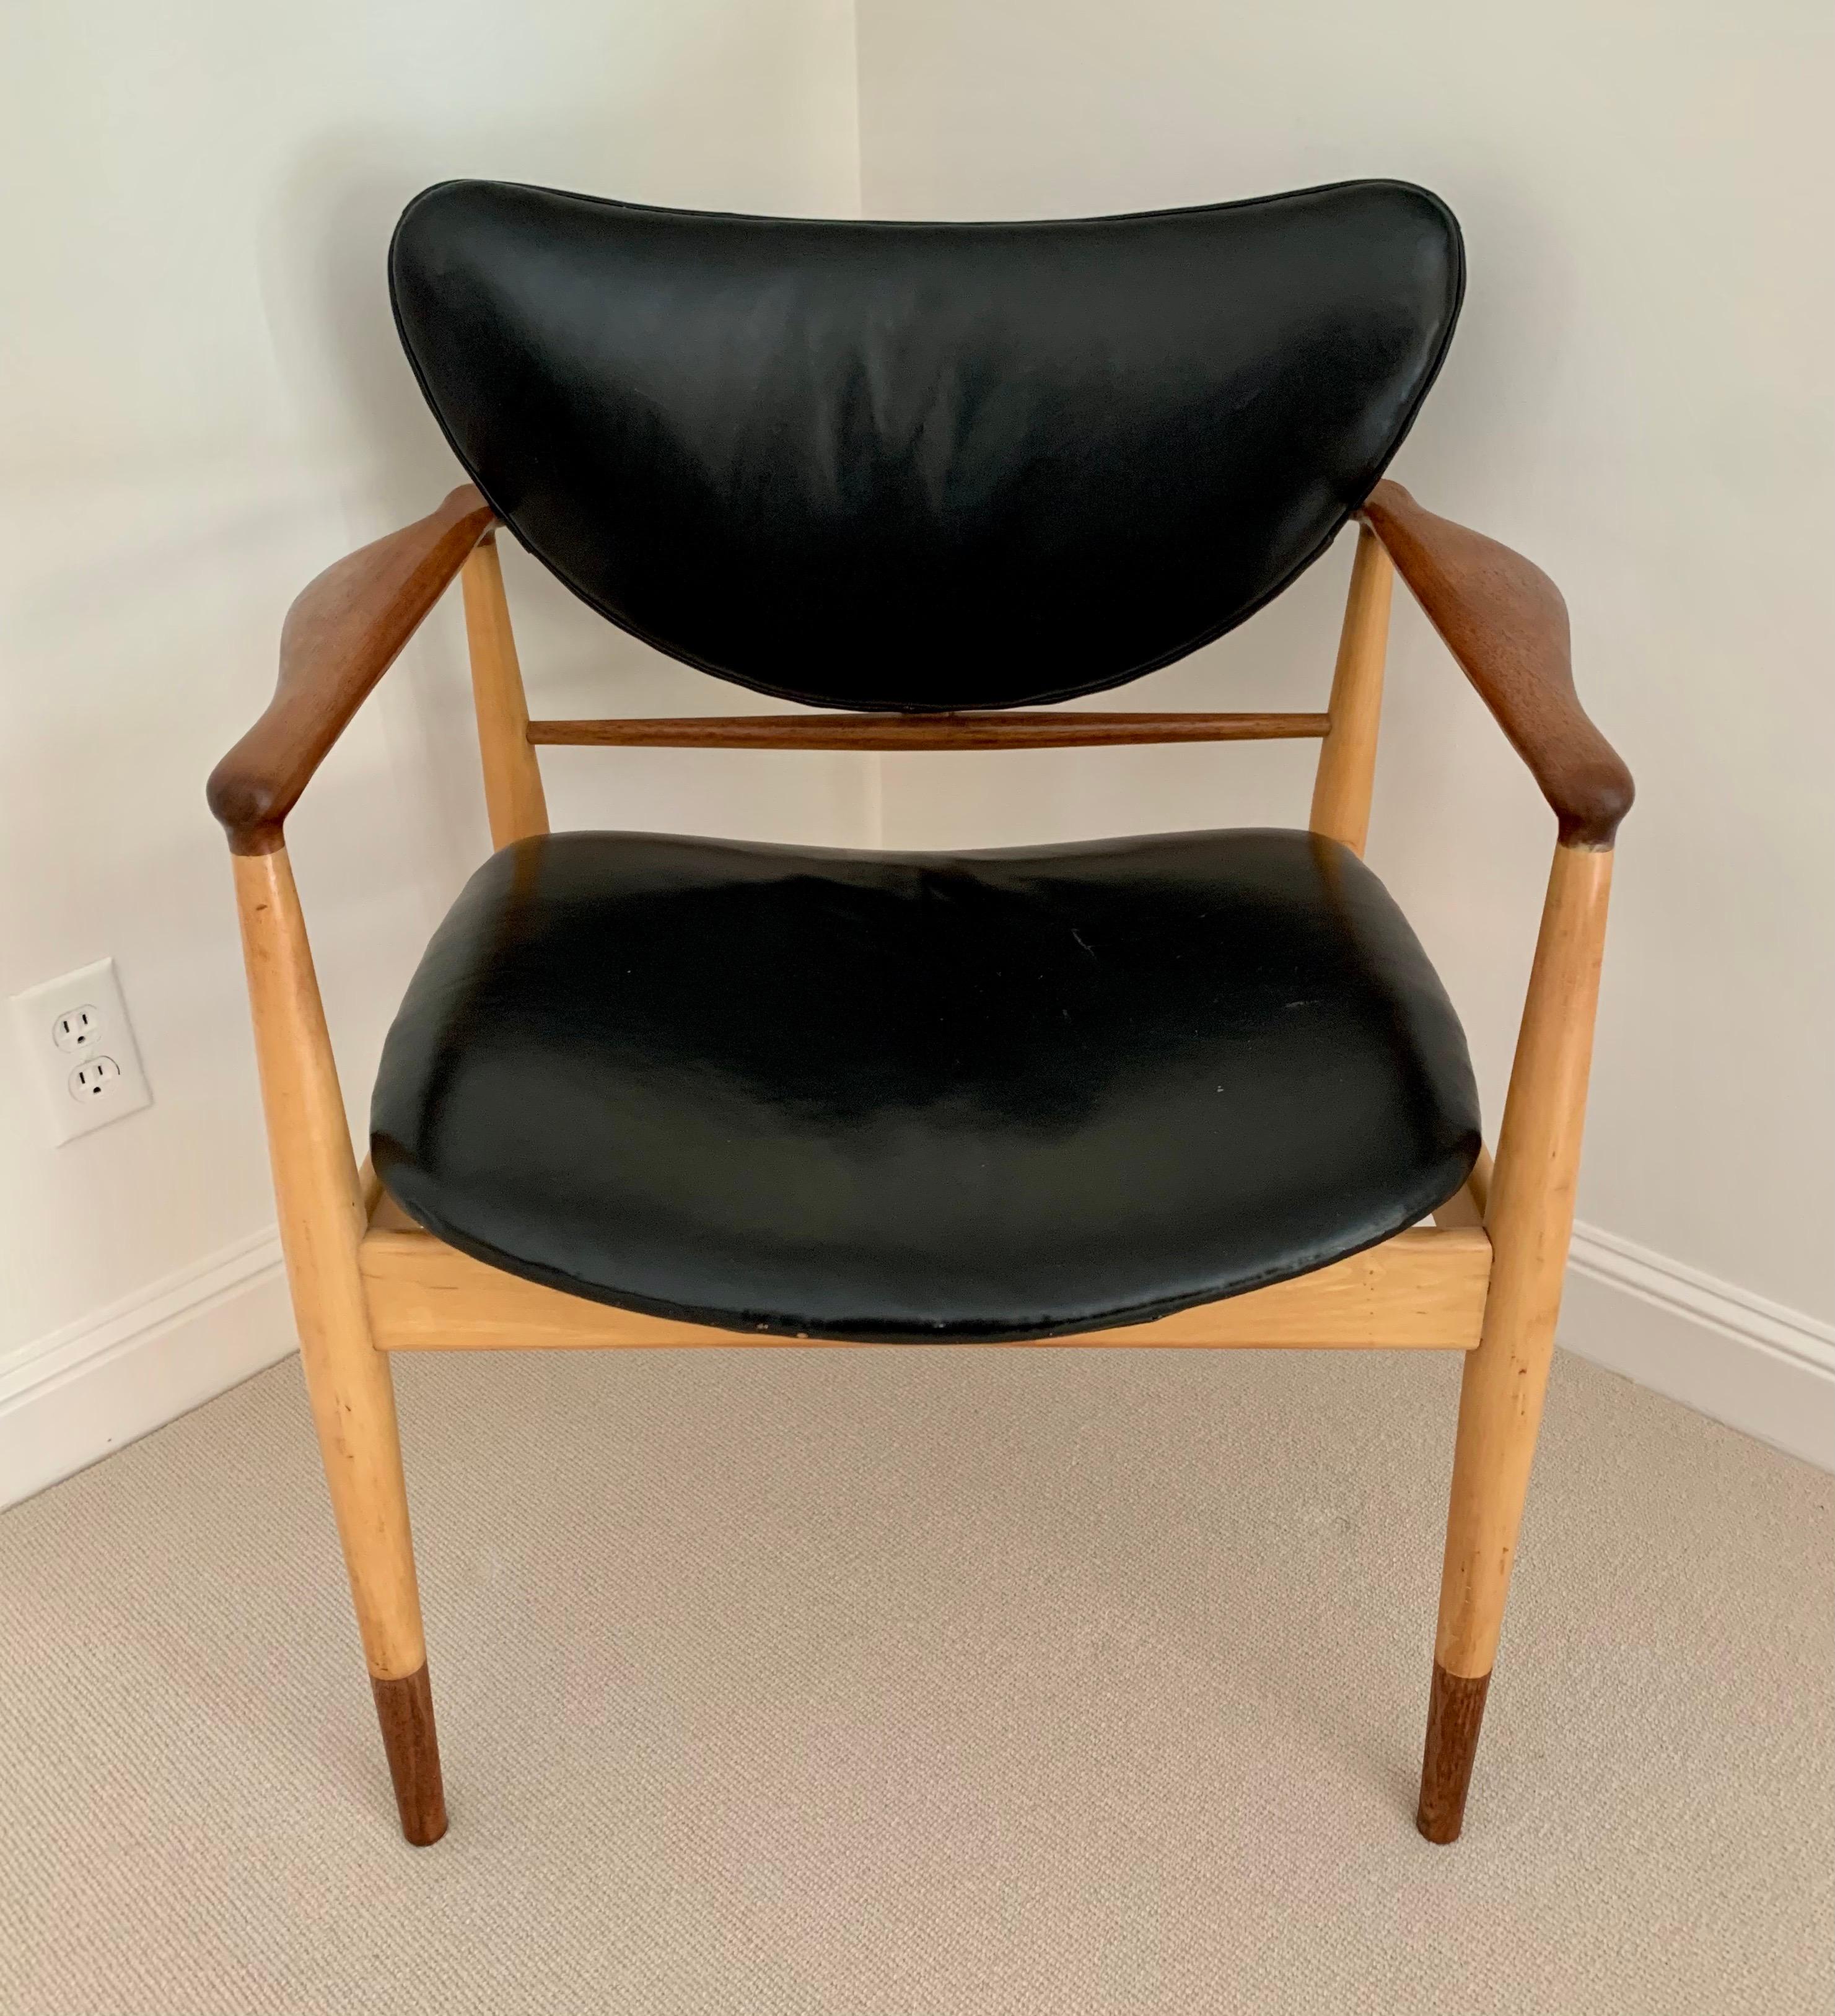 Ultra rare Finn Juhl #48 chair features a maple and walnut two-tone frame. The fabric appears to be leather and has small flaws. It is both elegant and comfortable. Perfect in a dining room or conference room See our other listing for matching chair.